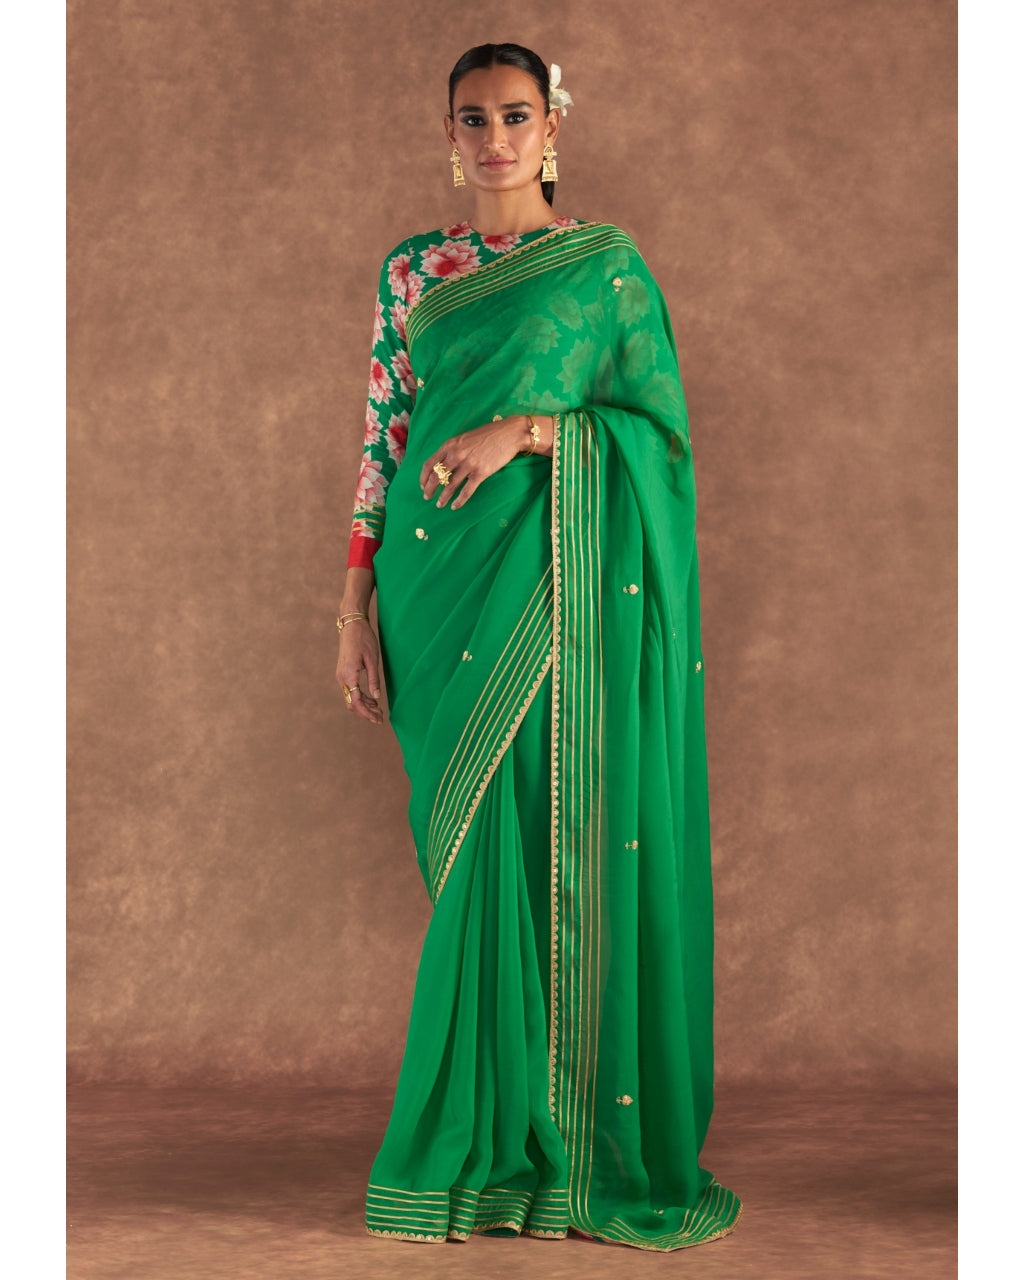 Green Berrybloom Sari By House Of Masaba